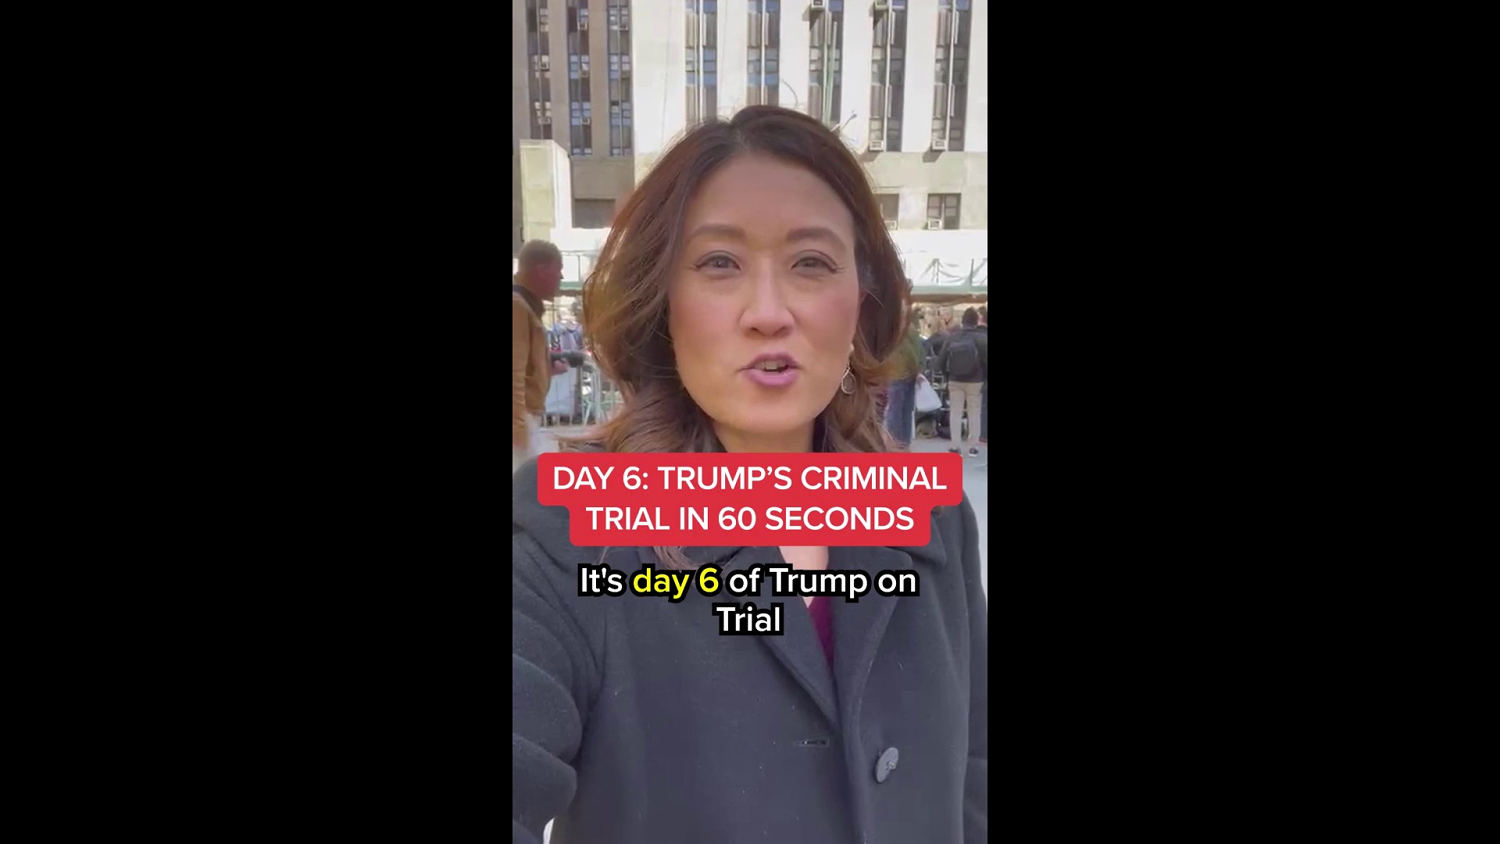 Day 6 of Trump's hush money trial in 60 seconds